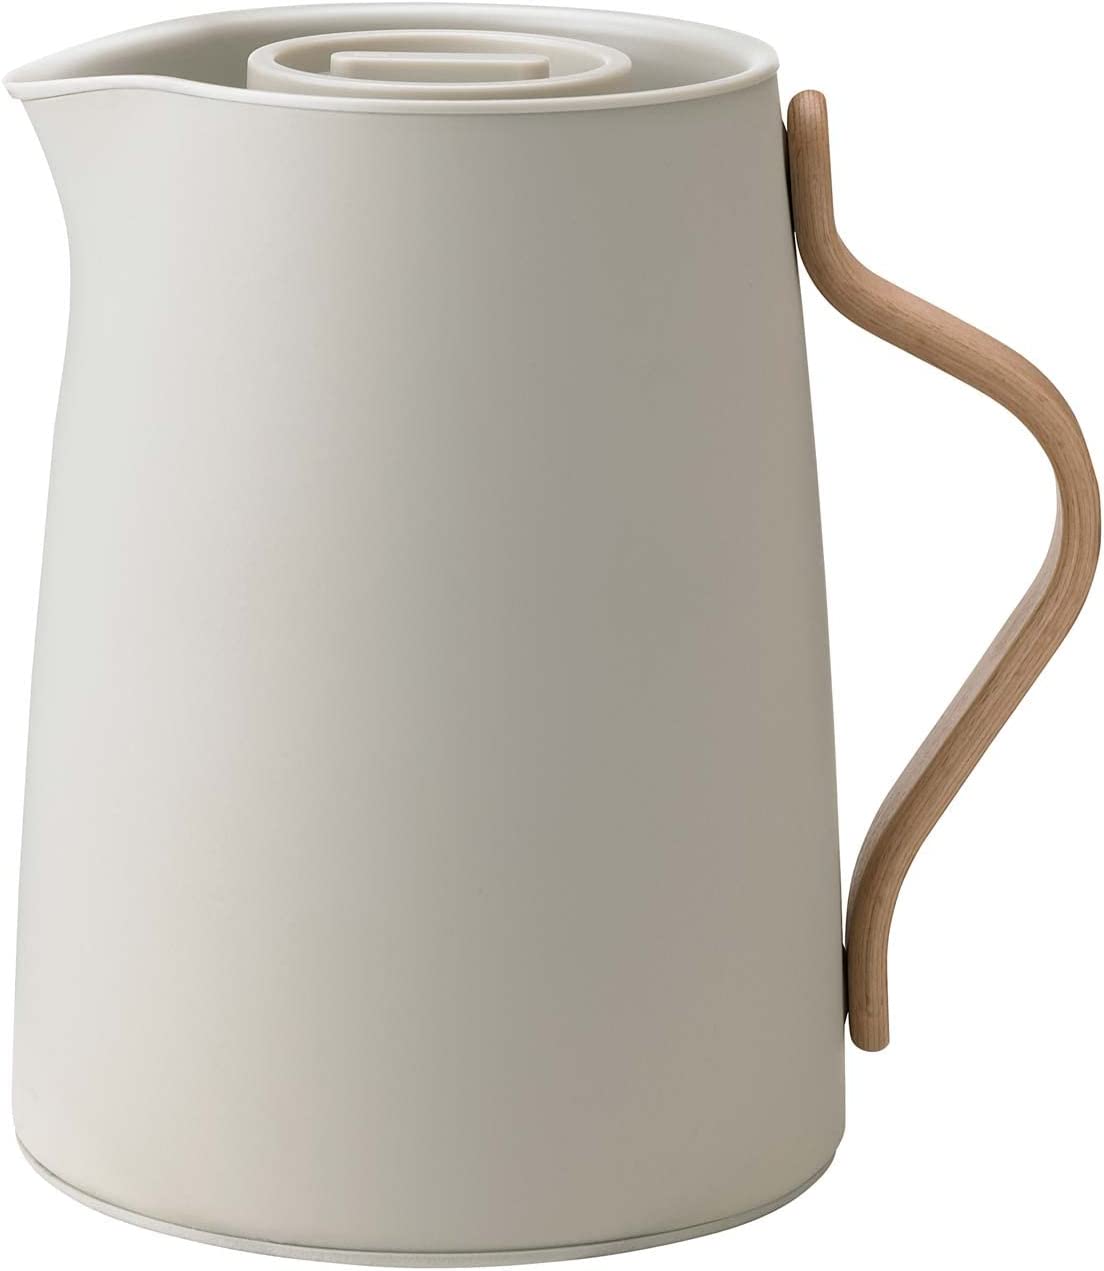 Stelton Emma Tea Insulated Jug - Insulated Plastic Teapot with Lid & Stainless Steel Thermal Insert - Modern Design, Clever, Integrated Infusion Filter & Beech Wood Handle - 1 Litre, Soft Sand